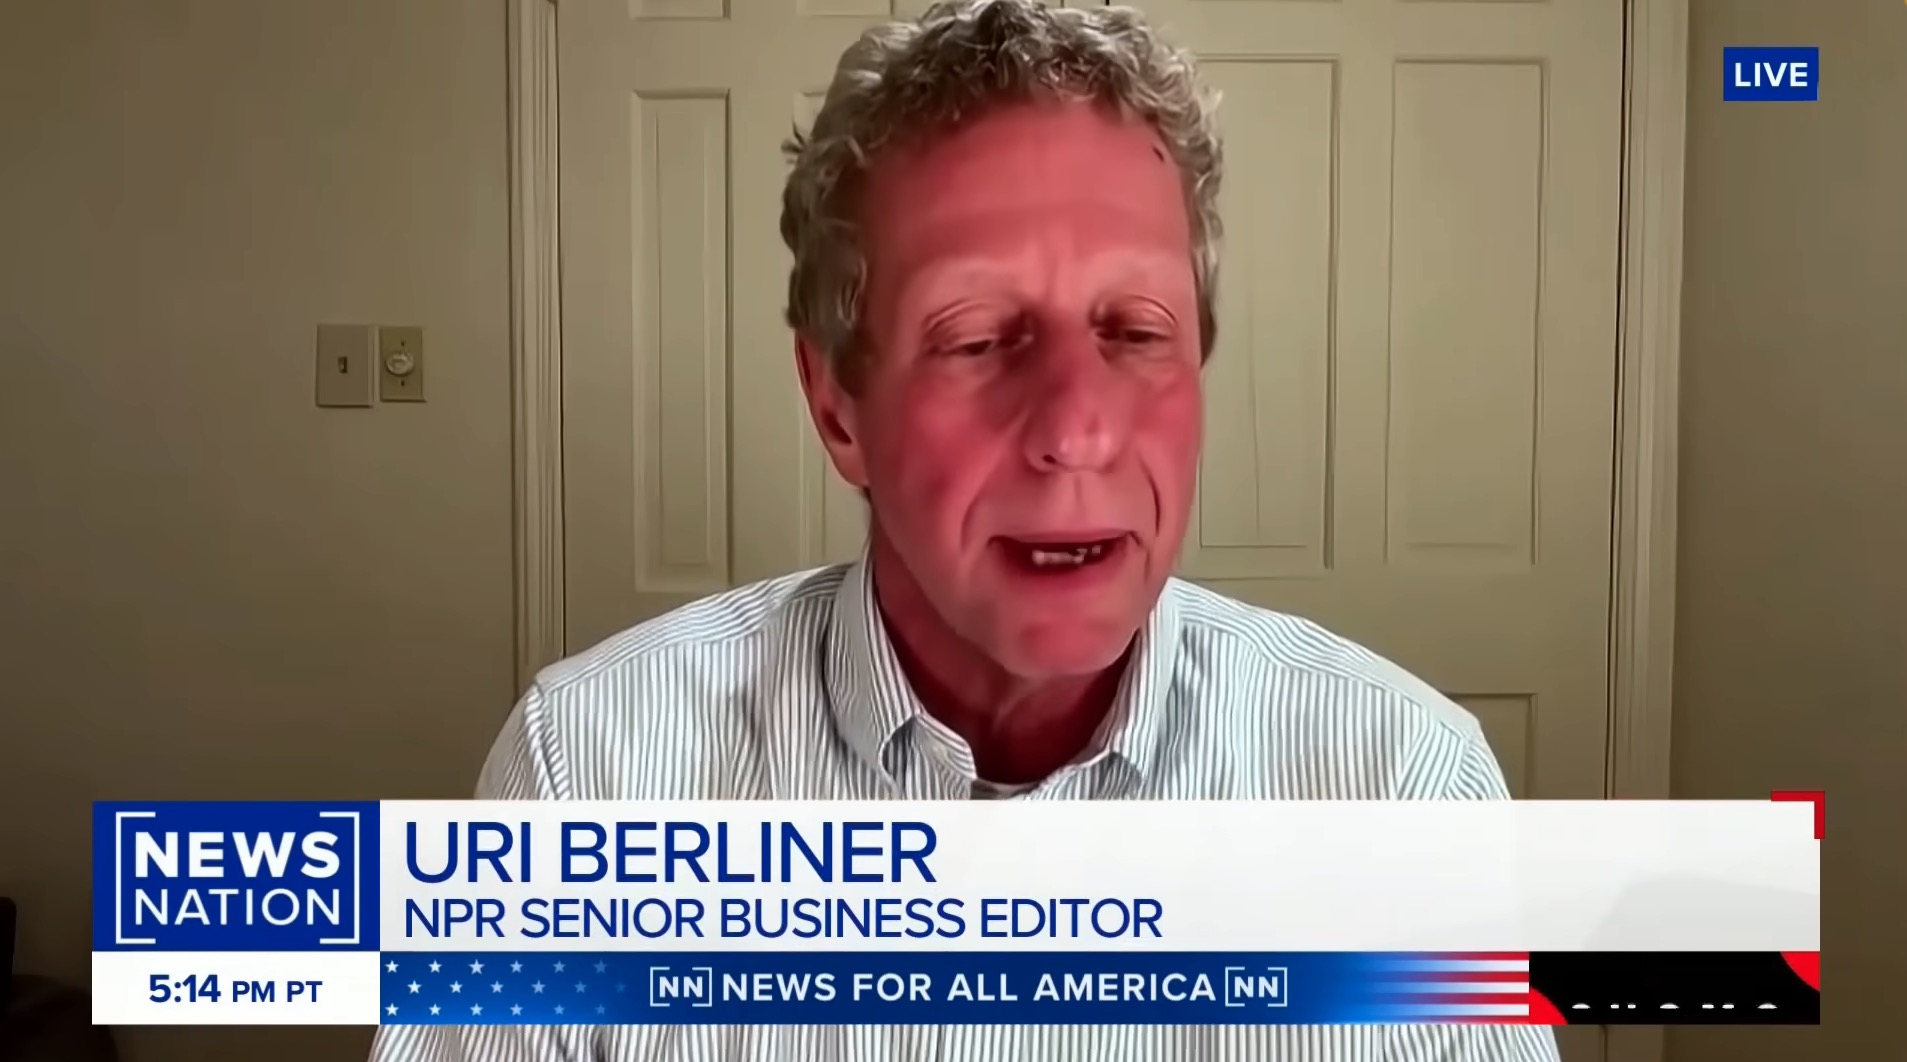 Uri Berliner, NPR Editor Who Claimed Liberal Bias, Quits -and Adds He Doesn’t Support Defunding (mediaite.com)